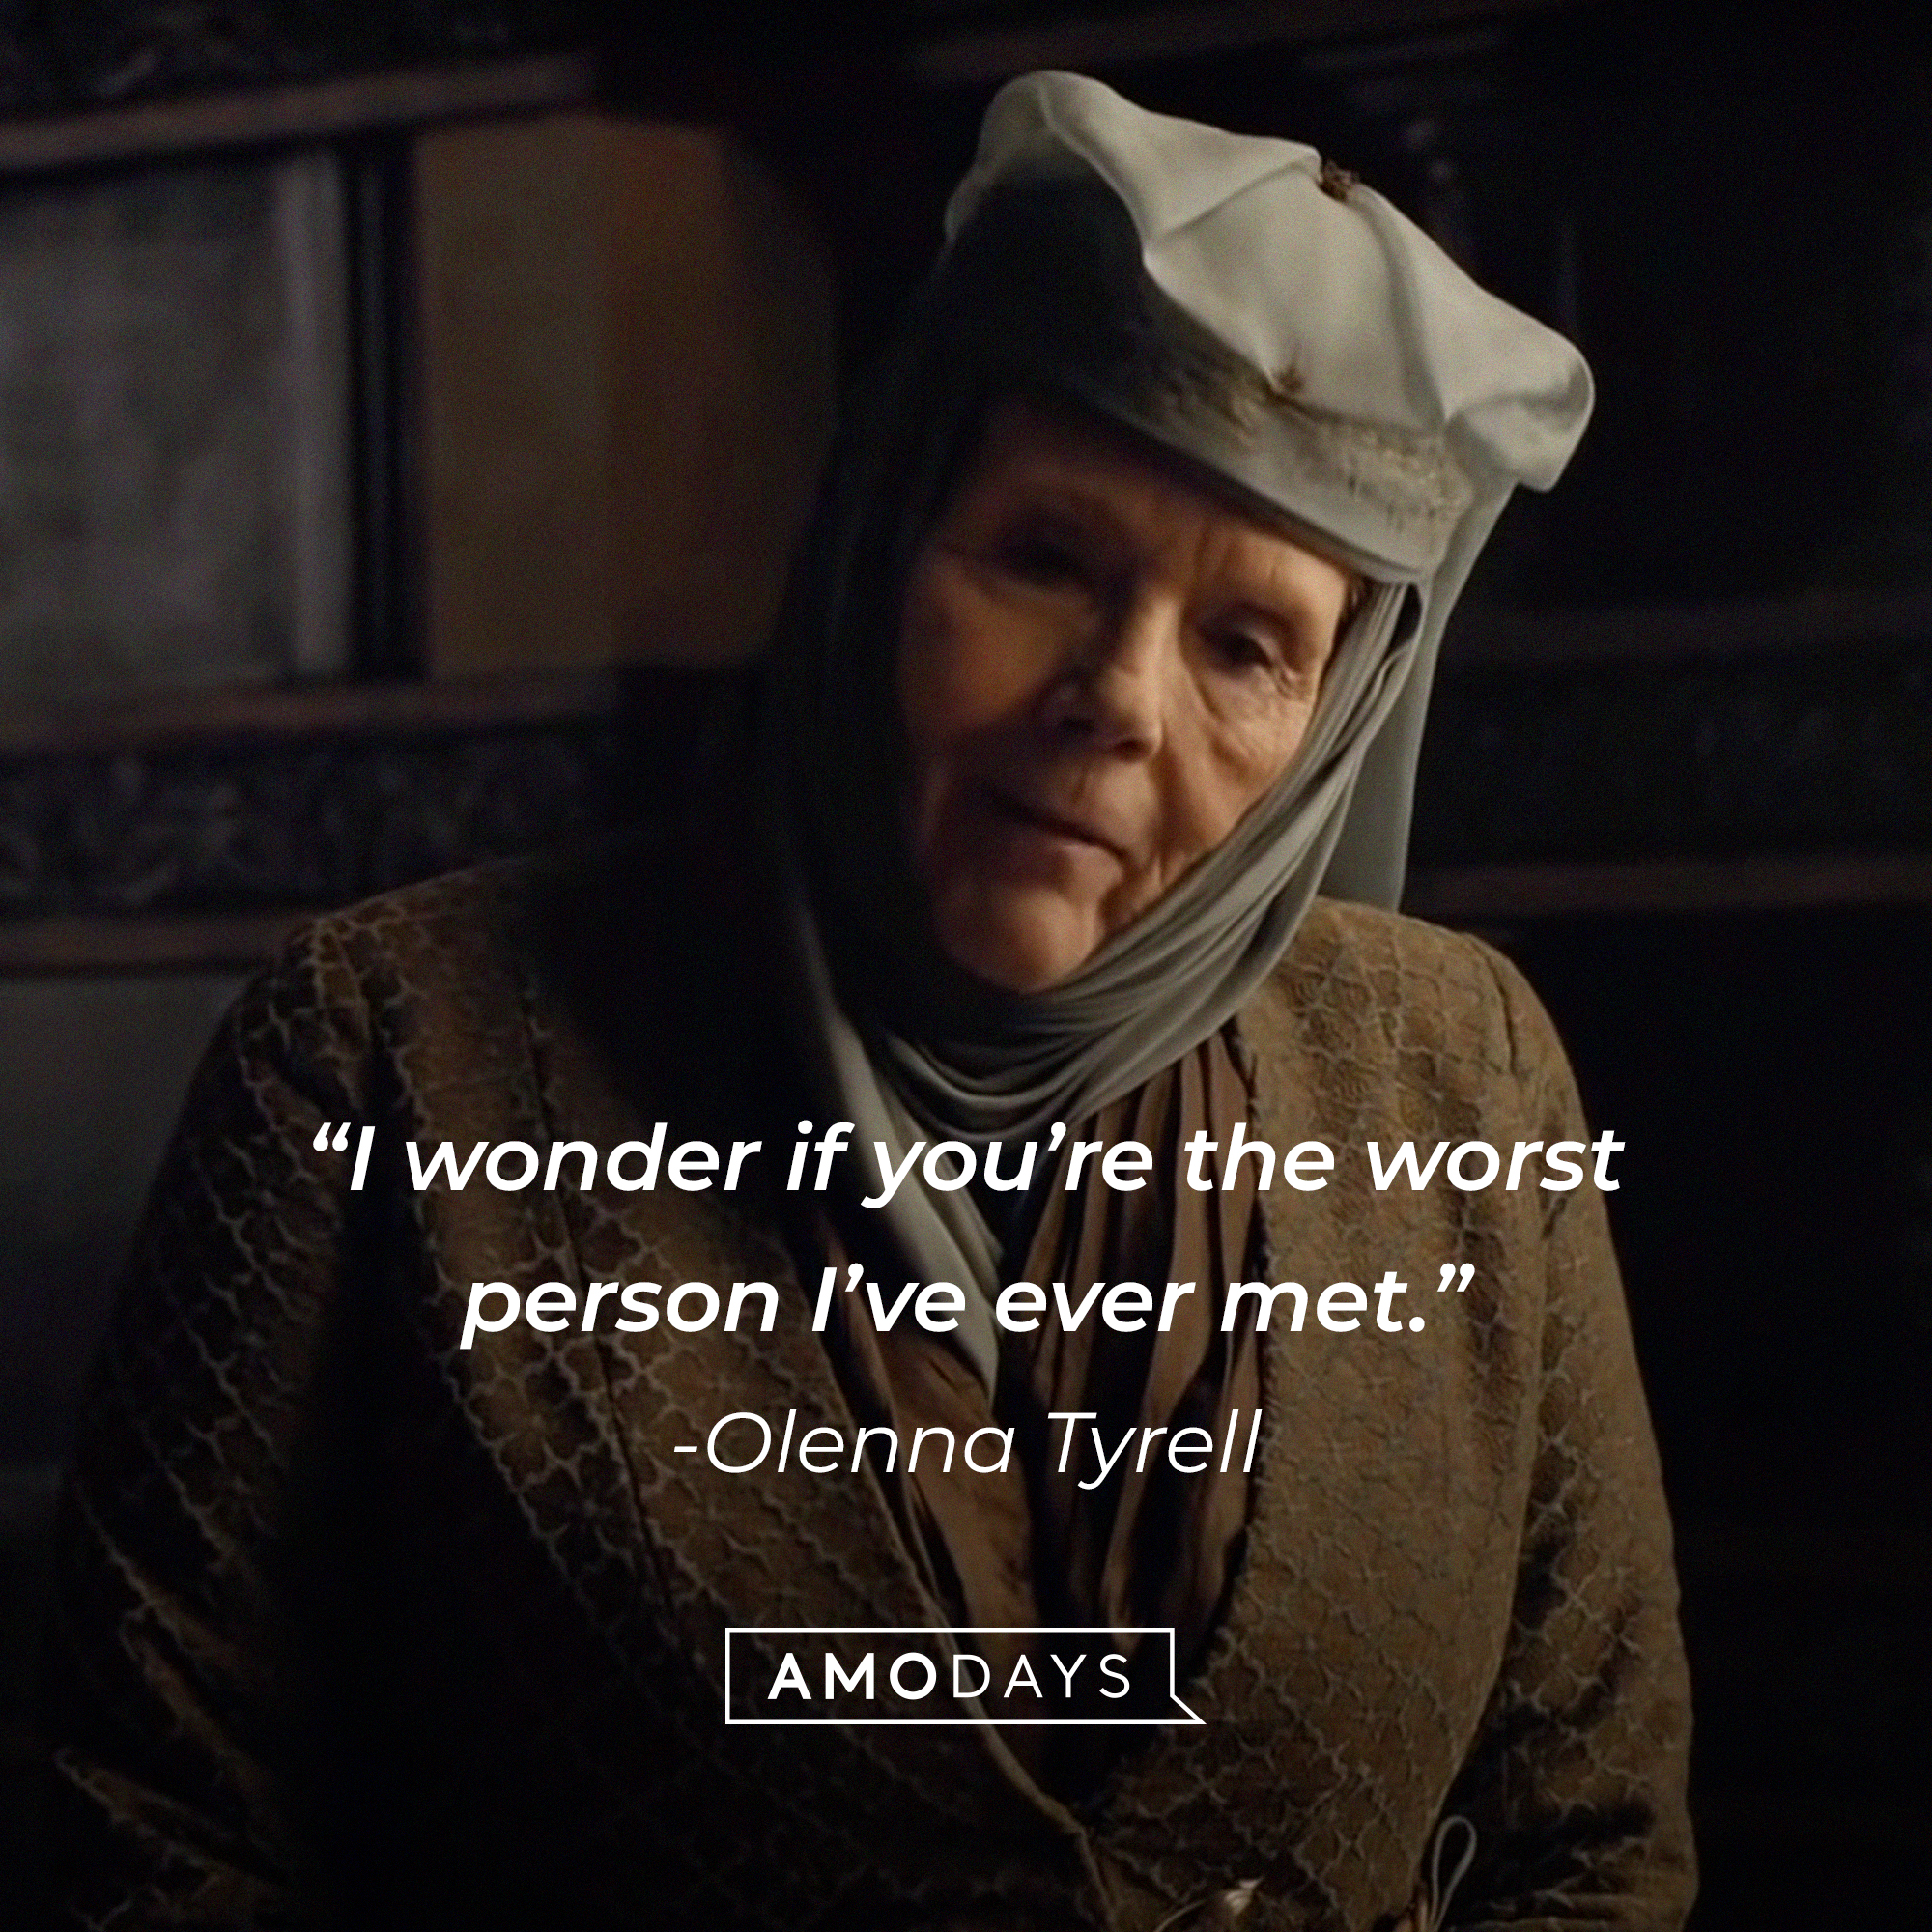 Olenna Tyrell, with her quote: "I wonder if you’re the worst person I’ve ever met.”│ Source: facebook.com/GameOfThrones